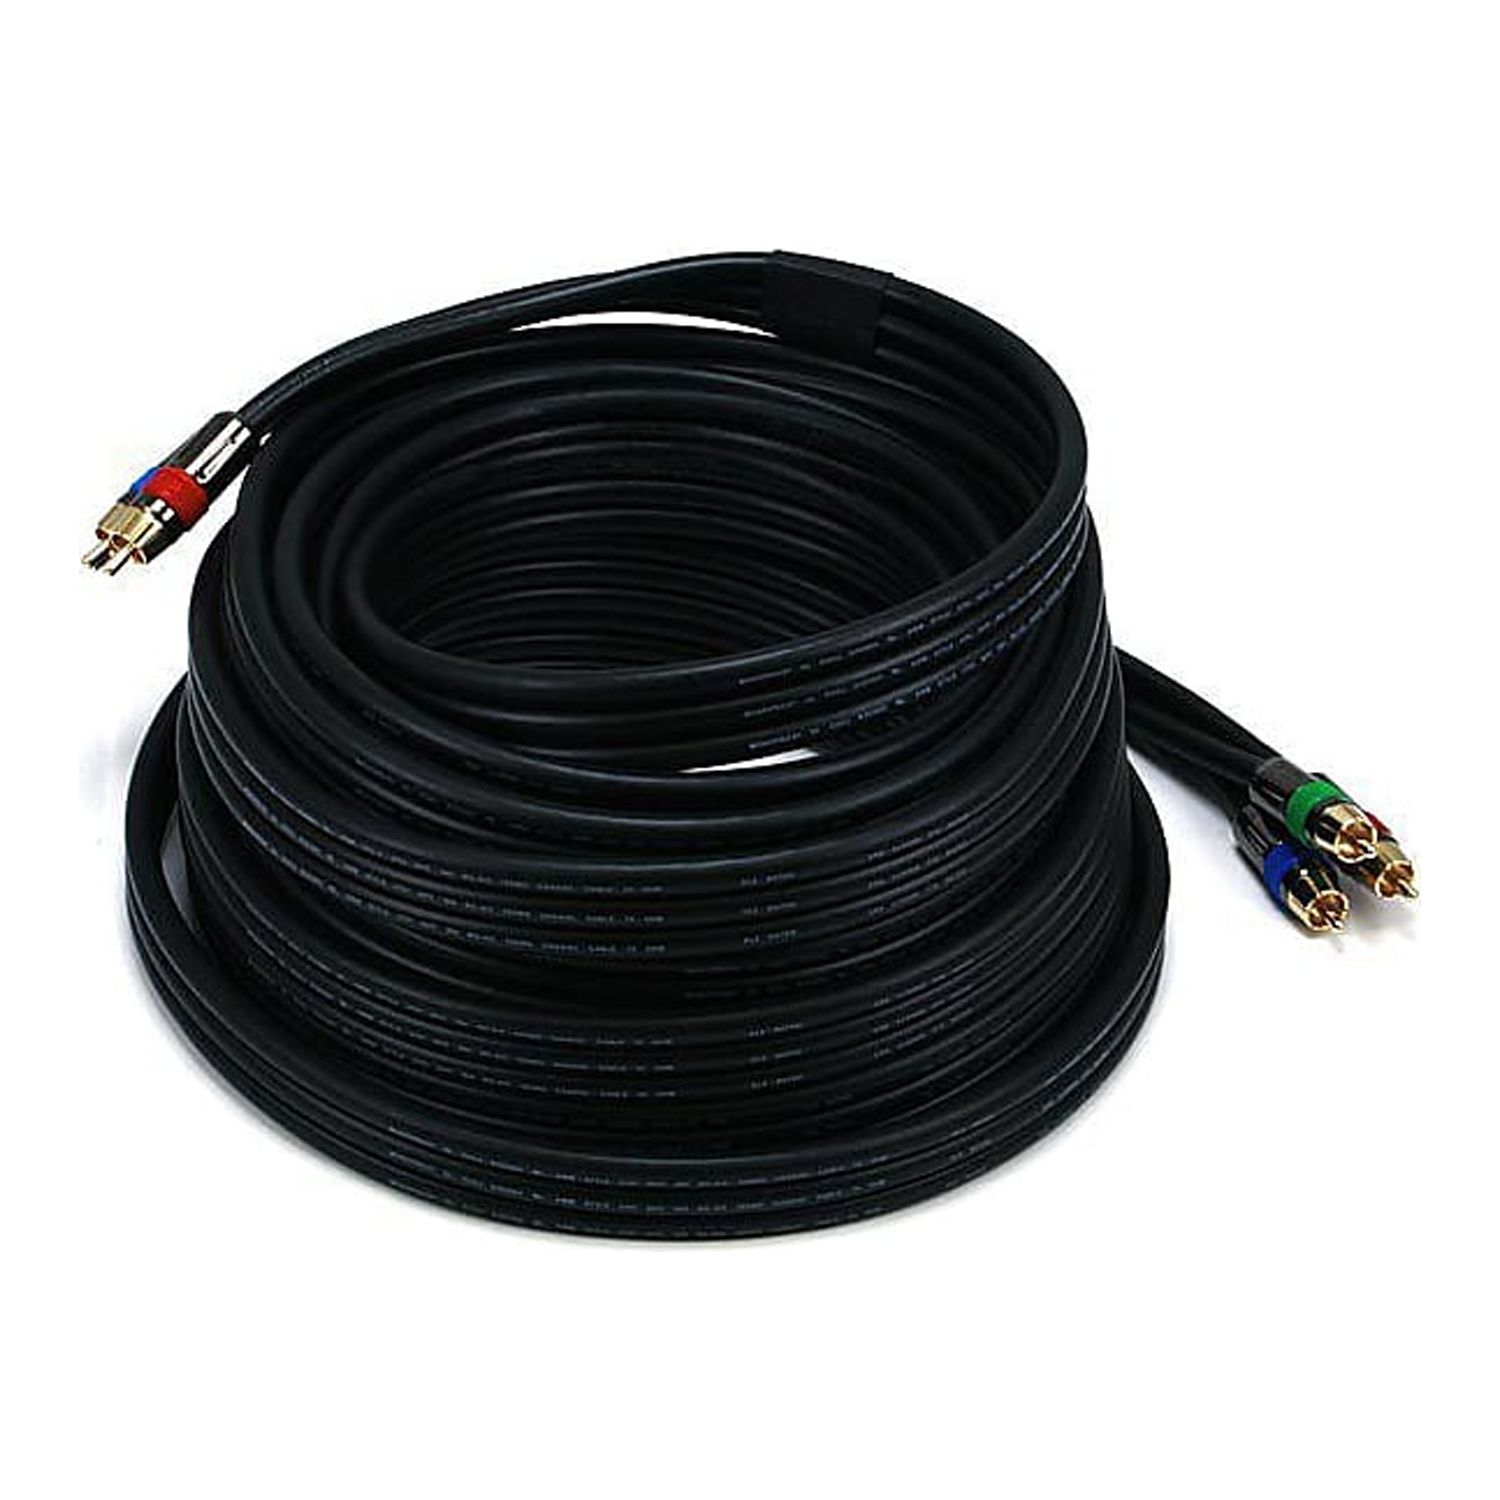 Monoprice Premium 35' 2-RCA Plug Male to Male 22AWG Cable Black 102867 - image 2 of 2